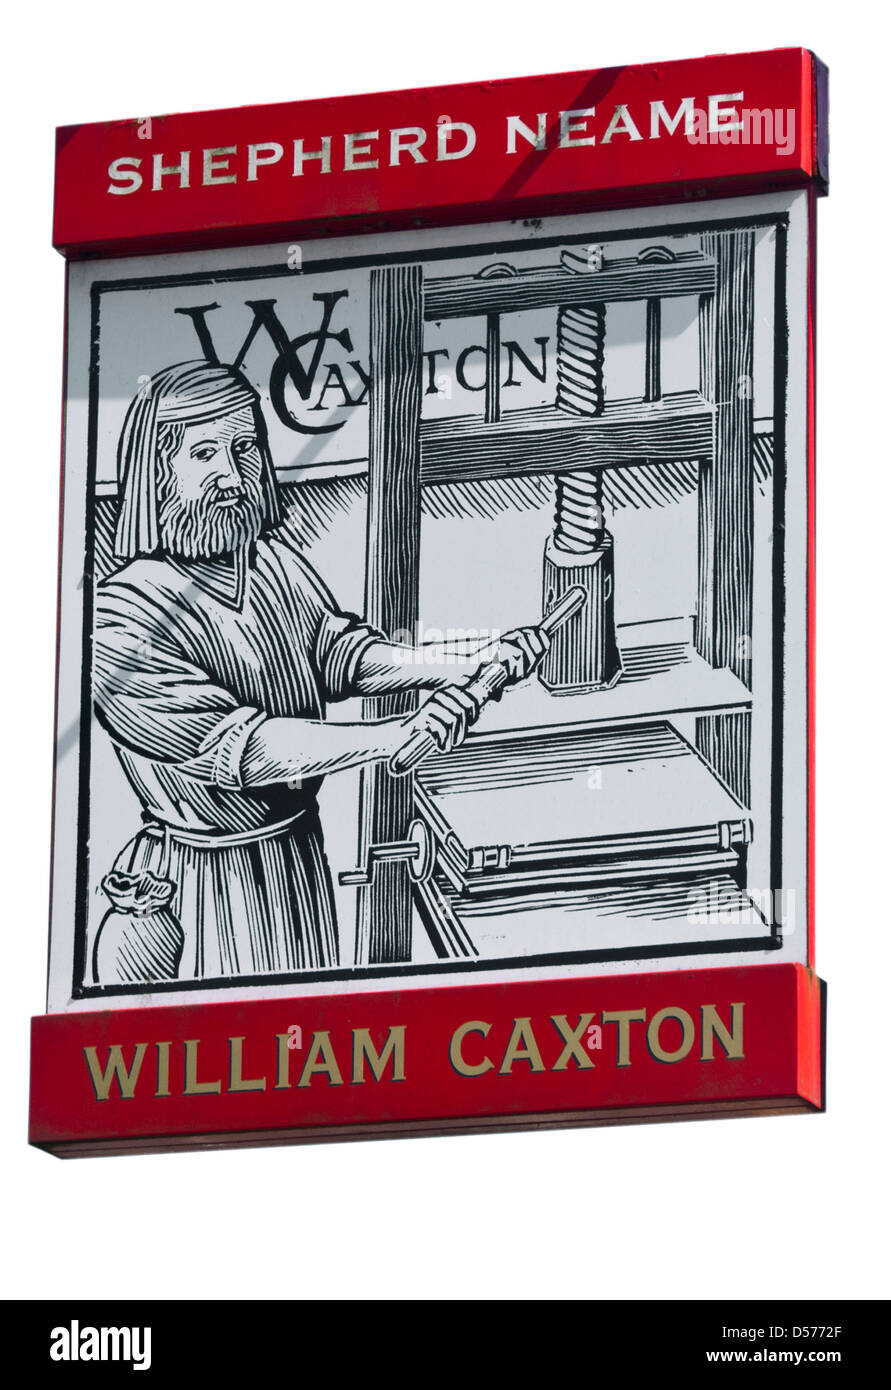 The William Caxton Shepherd Neame Pub Sign UK Pubs Signs Stock Photo